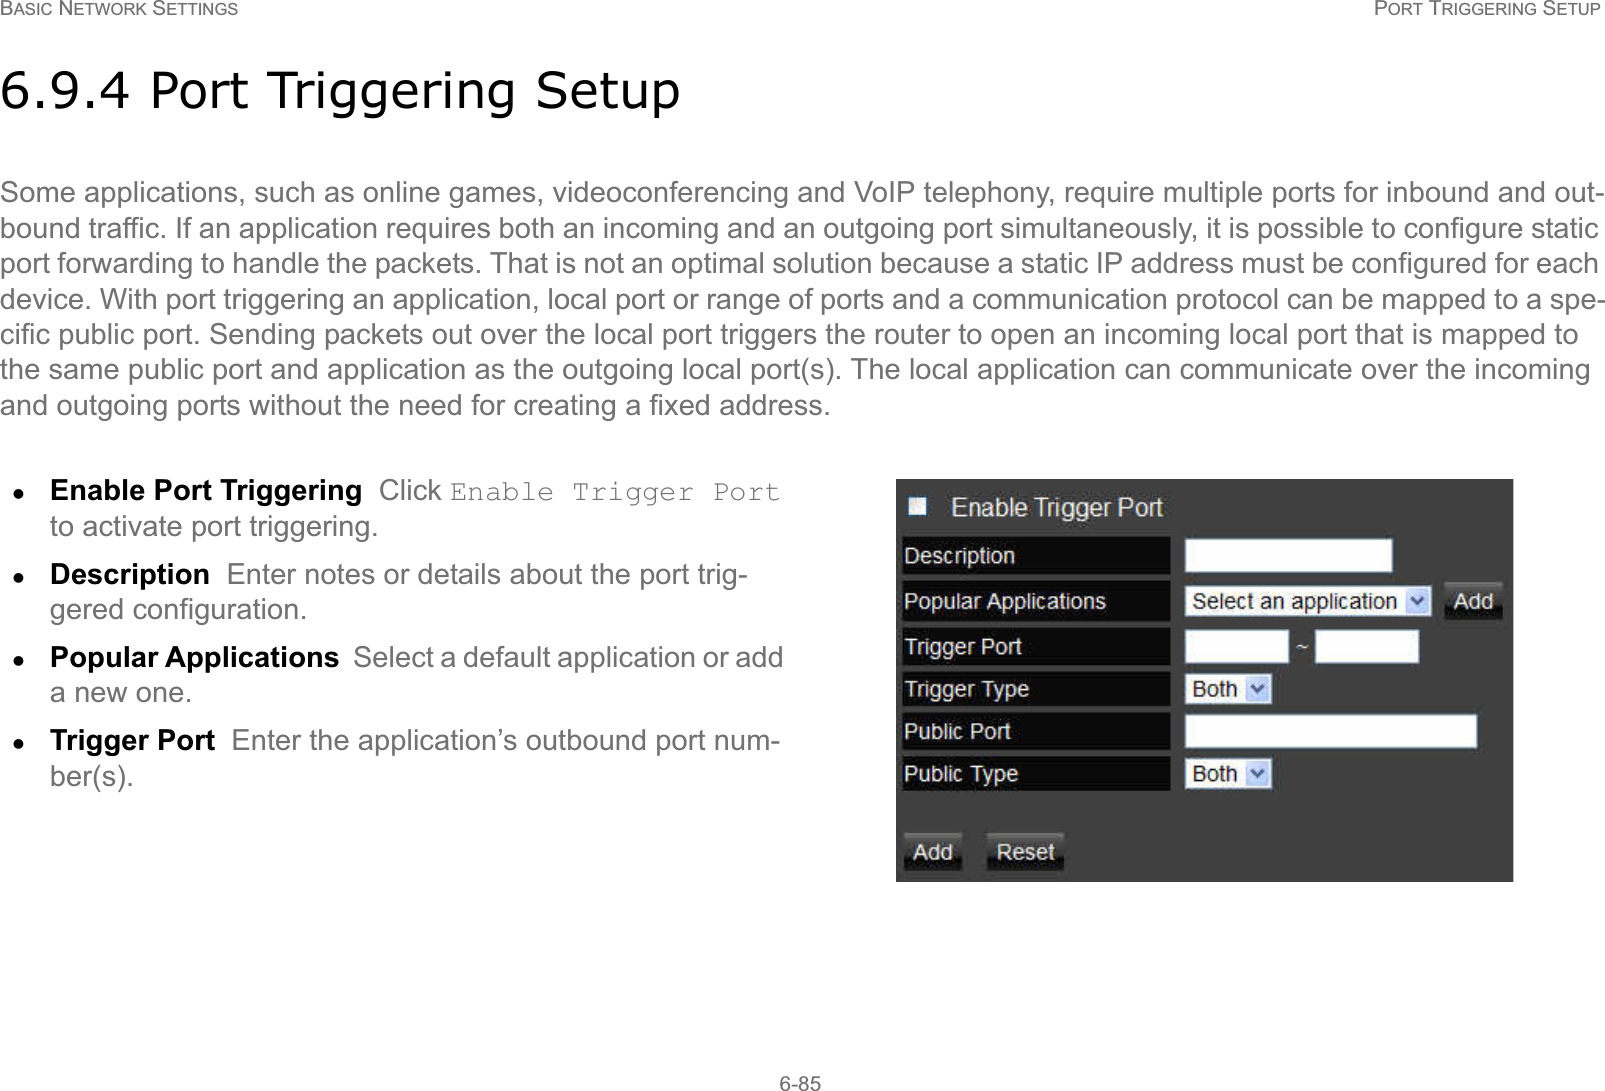 BASIC NETWORK SETTINGS PORT TRIGGERING SETUP6-856.9.4 Port Triggering SetupSome applications, such as online games, videoconferencing and VoIP telephony, require multiple ports for inbound and out-bound traffic. If an application requires both an incoming and an outgoing port simultaneously, it is possible to configure static port forwarding to handle the packets. That is not an optimal solution because a static IP address must be configured for each device. With port triggering an application, local port or range of ports and a communication protocol can be mapped to a spe-cific public port. Sending packets out over the local port triggers the router to open an incoming local port that is mapped to the same public port and application as the outgoing local port(s). The local application can communicate over the incoming and outgoing ports without the need for creating a fixed address.zEnable Port Triggering  Click Enable Trigger Port to activate port triggering.zDescription  Enter notes or details about the port trig-gered configuration.zPopular Applications  Select a default application or add a new one.zTrigger Port  Enter the application’s outbound port num-ber(s).